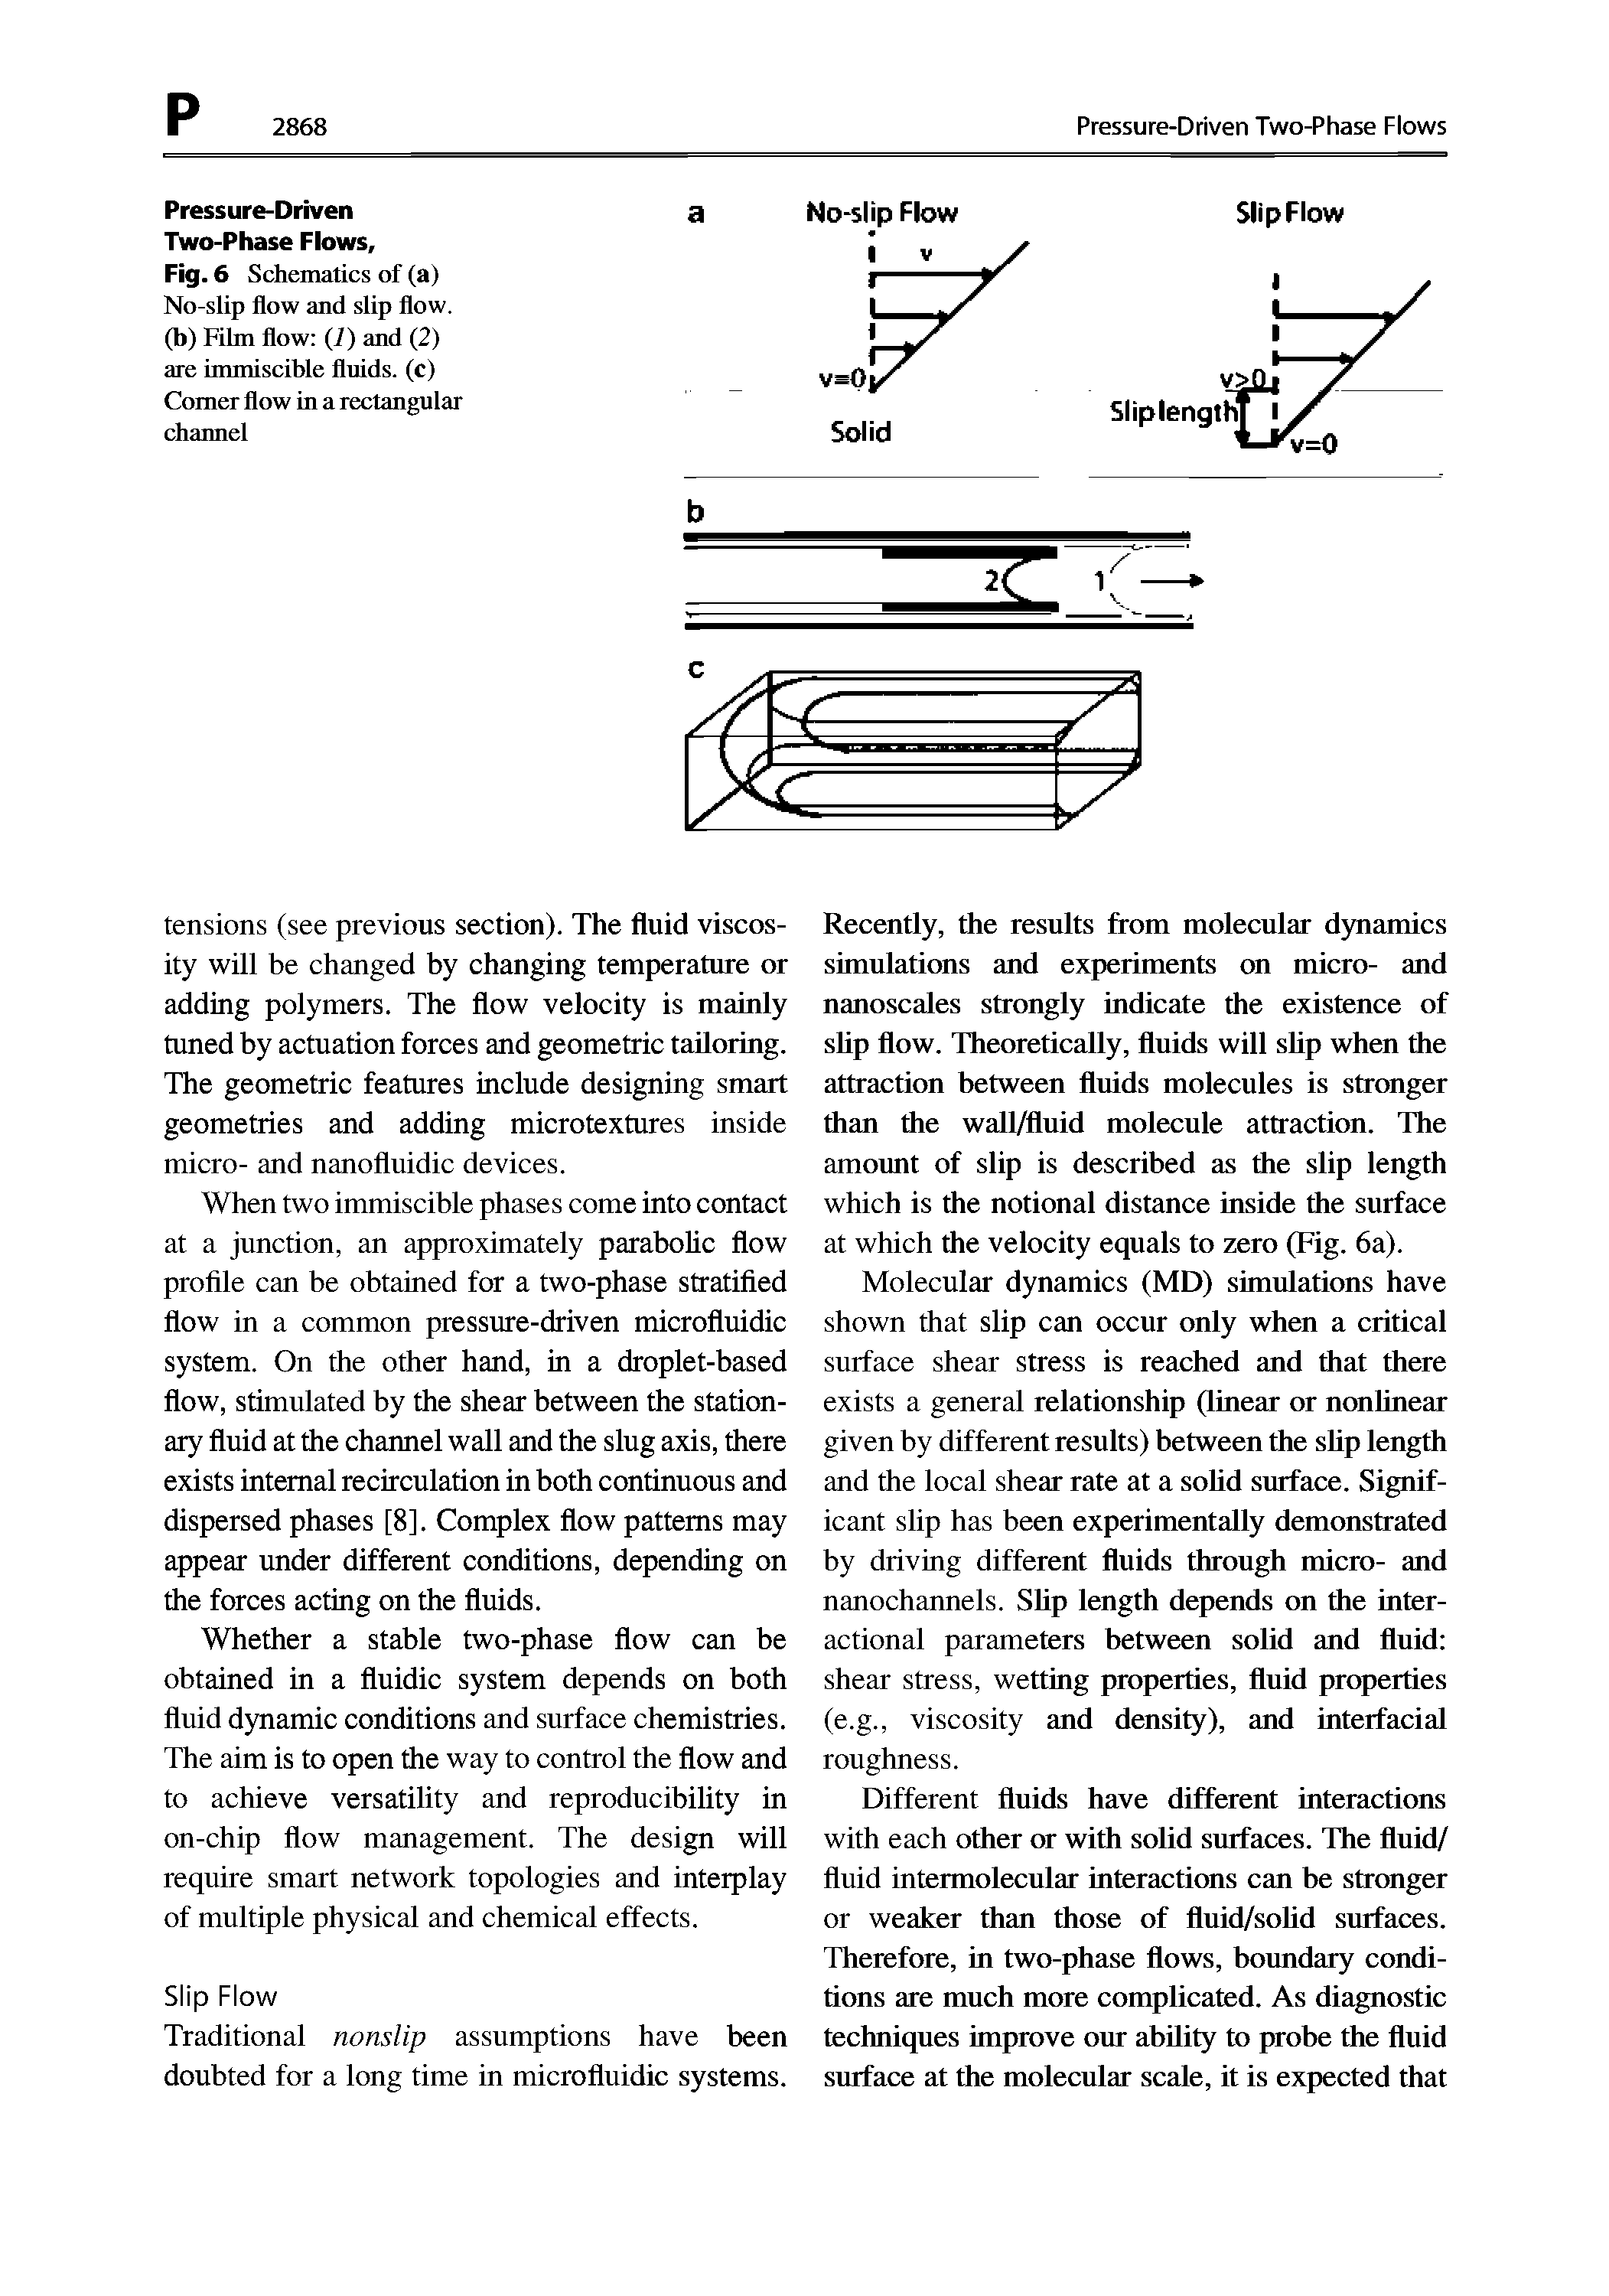 Fig. 6 Schematics of (a) No-slip flow and slip flow, (b) Film flow (i) and (2) are immiscible fluids, (c) Comer flow in a rectangular channel...